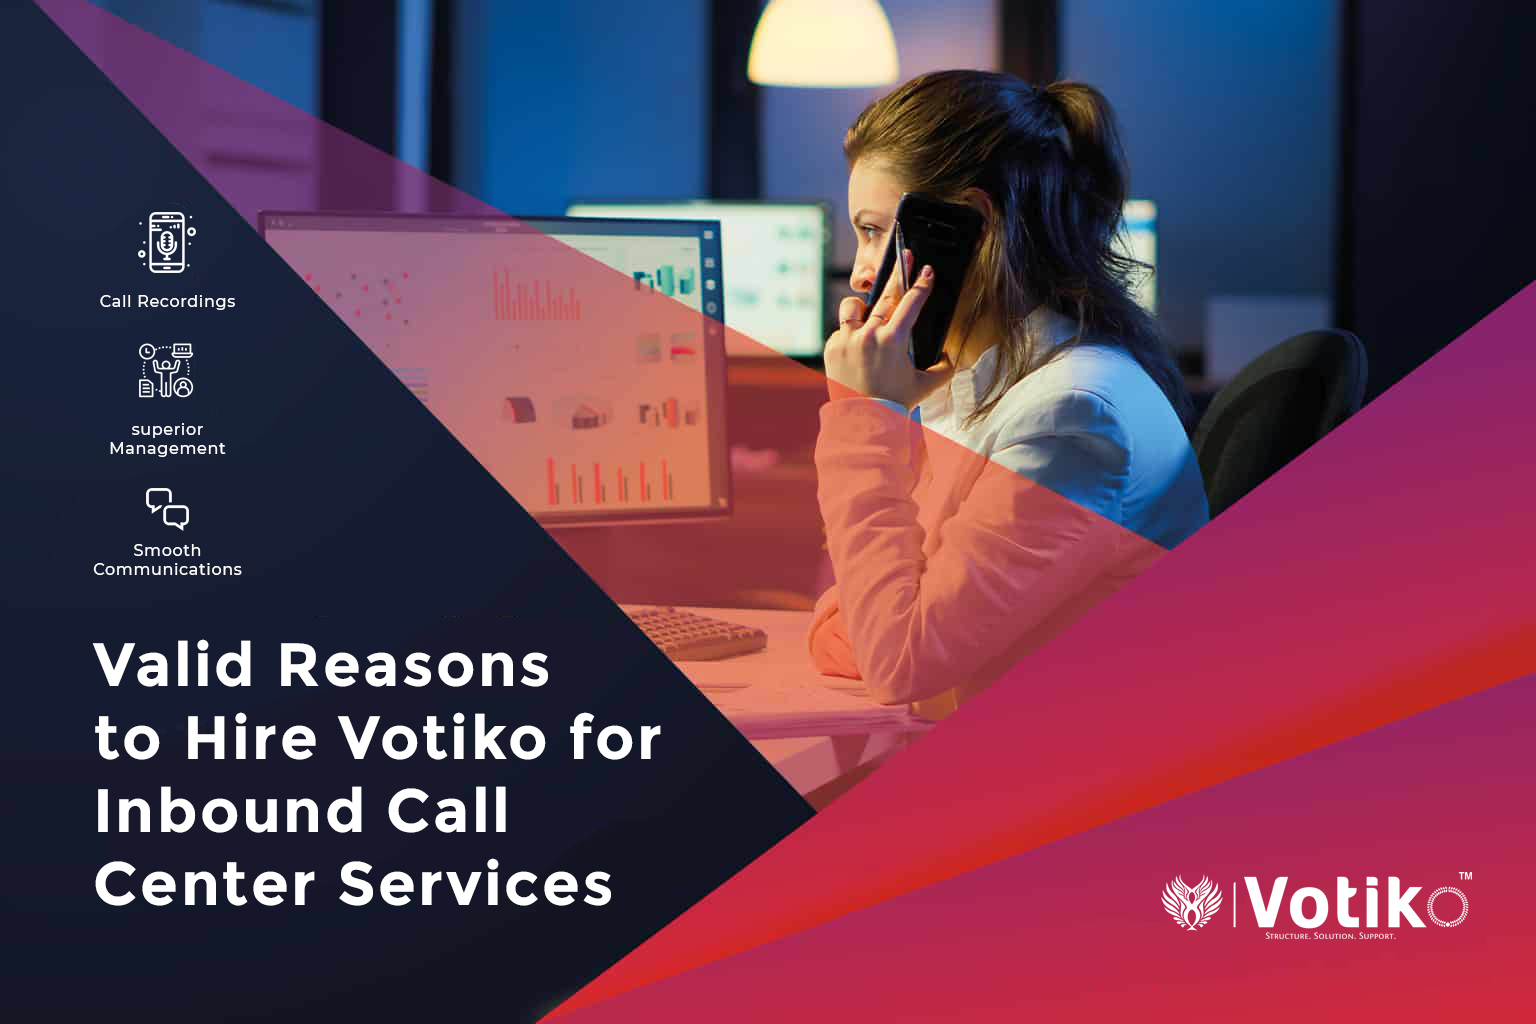 Valid Reasons to Hire Votiko for Inbound Call Center Services